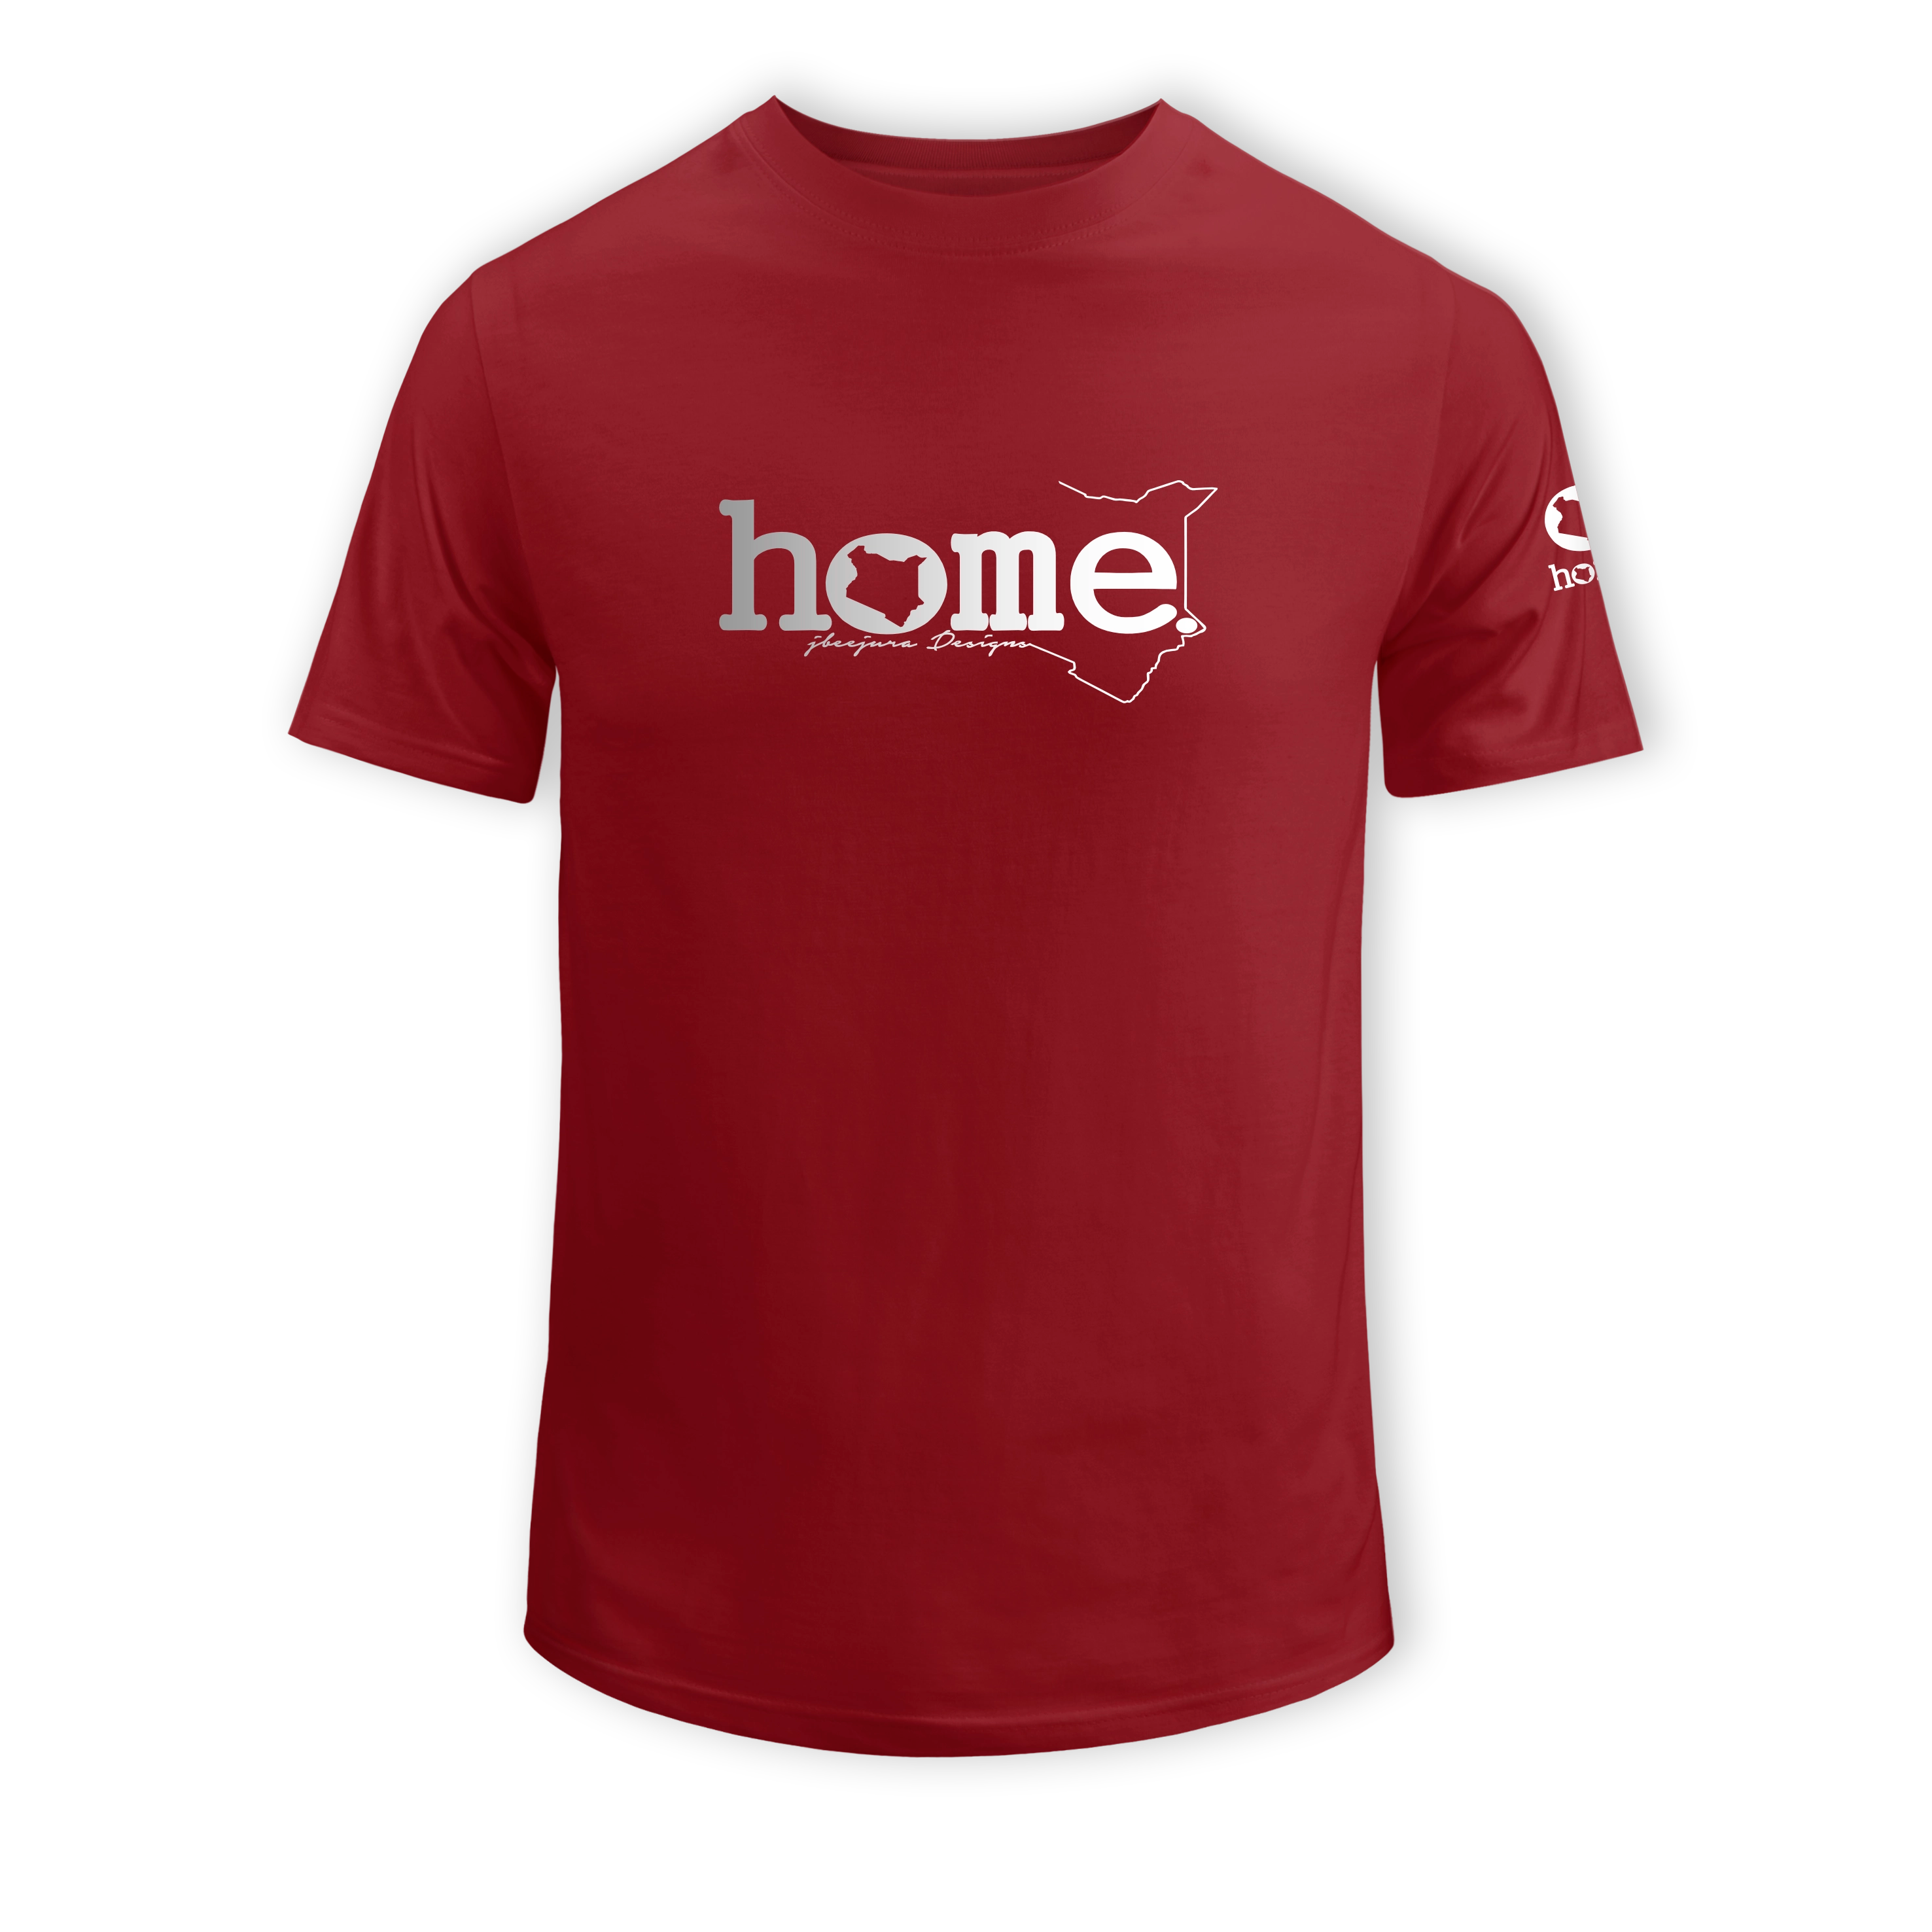 home_254 KIDS SHORT-SLEEVED MAROON RED T-SHIRT WITH A SILVER MAP PRINT – COTTON PLUS FABRIC